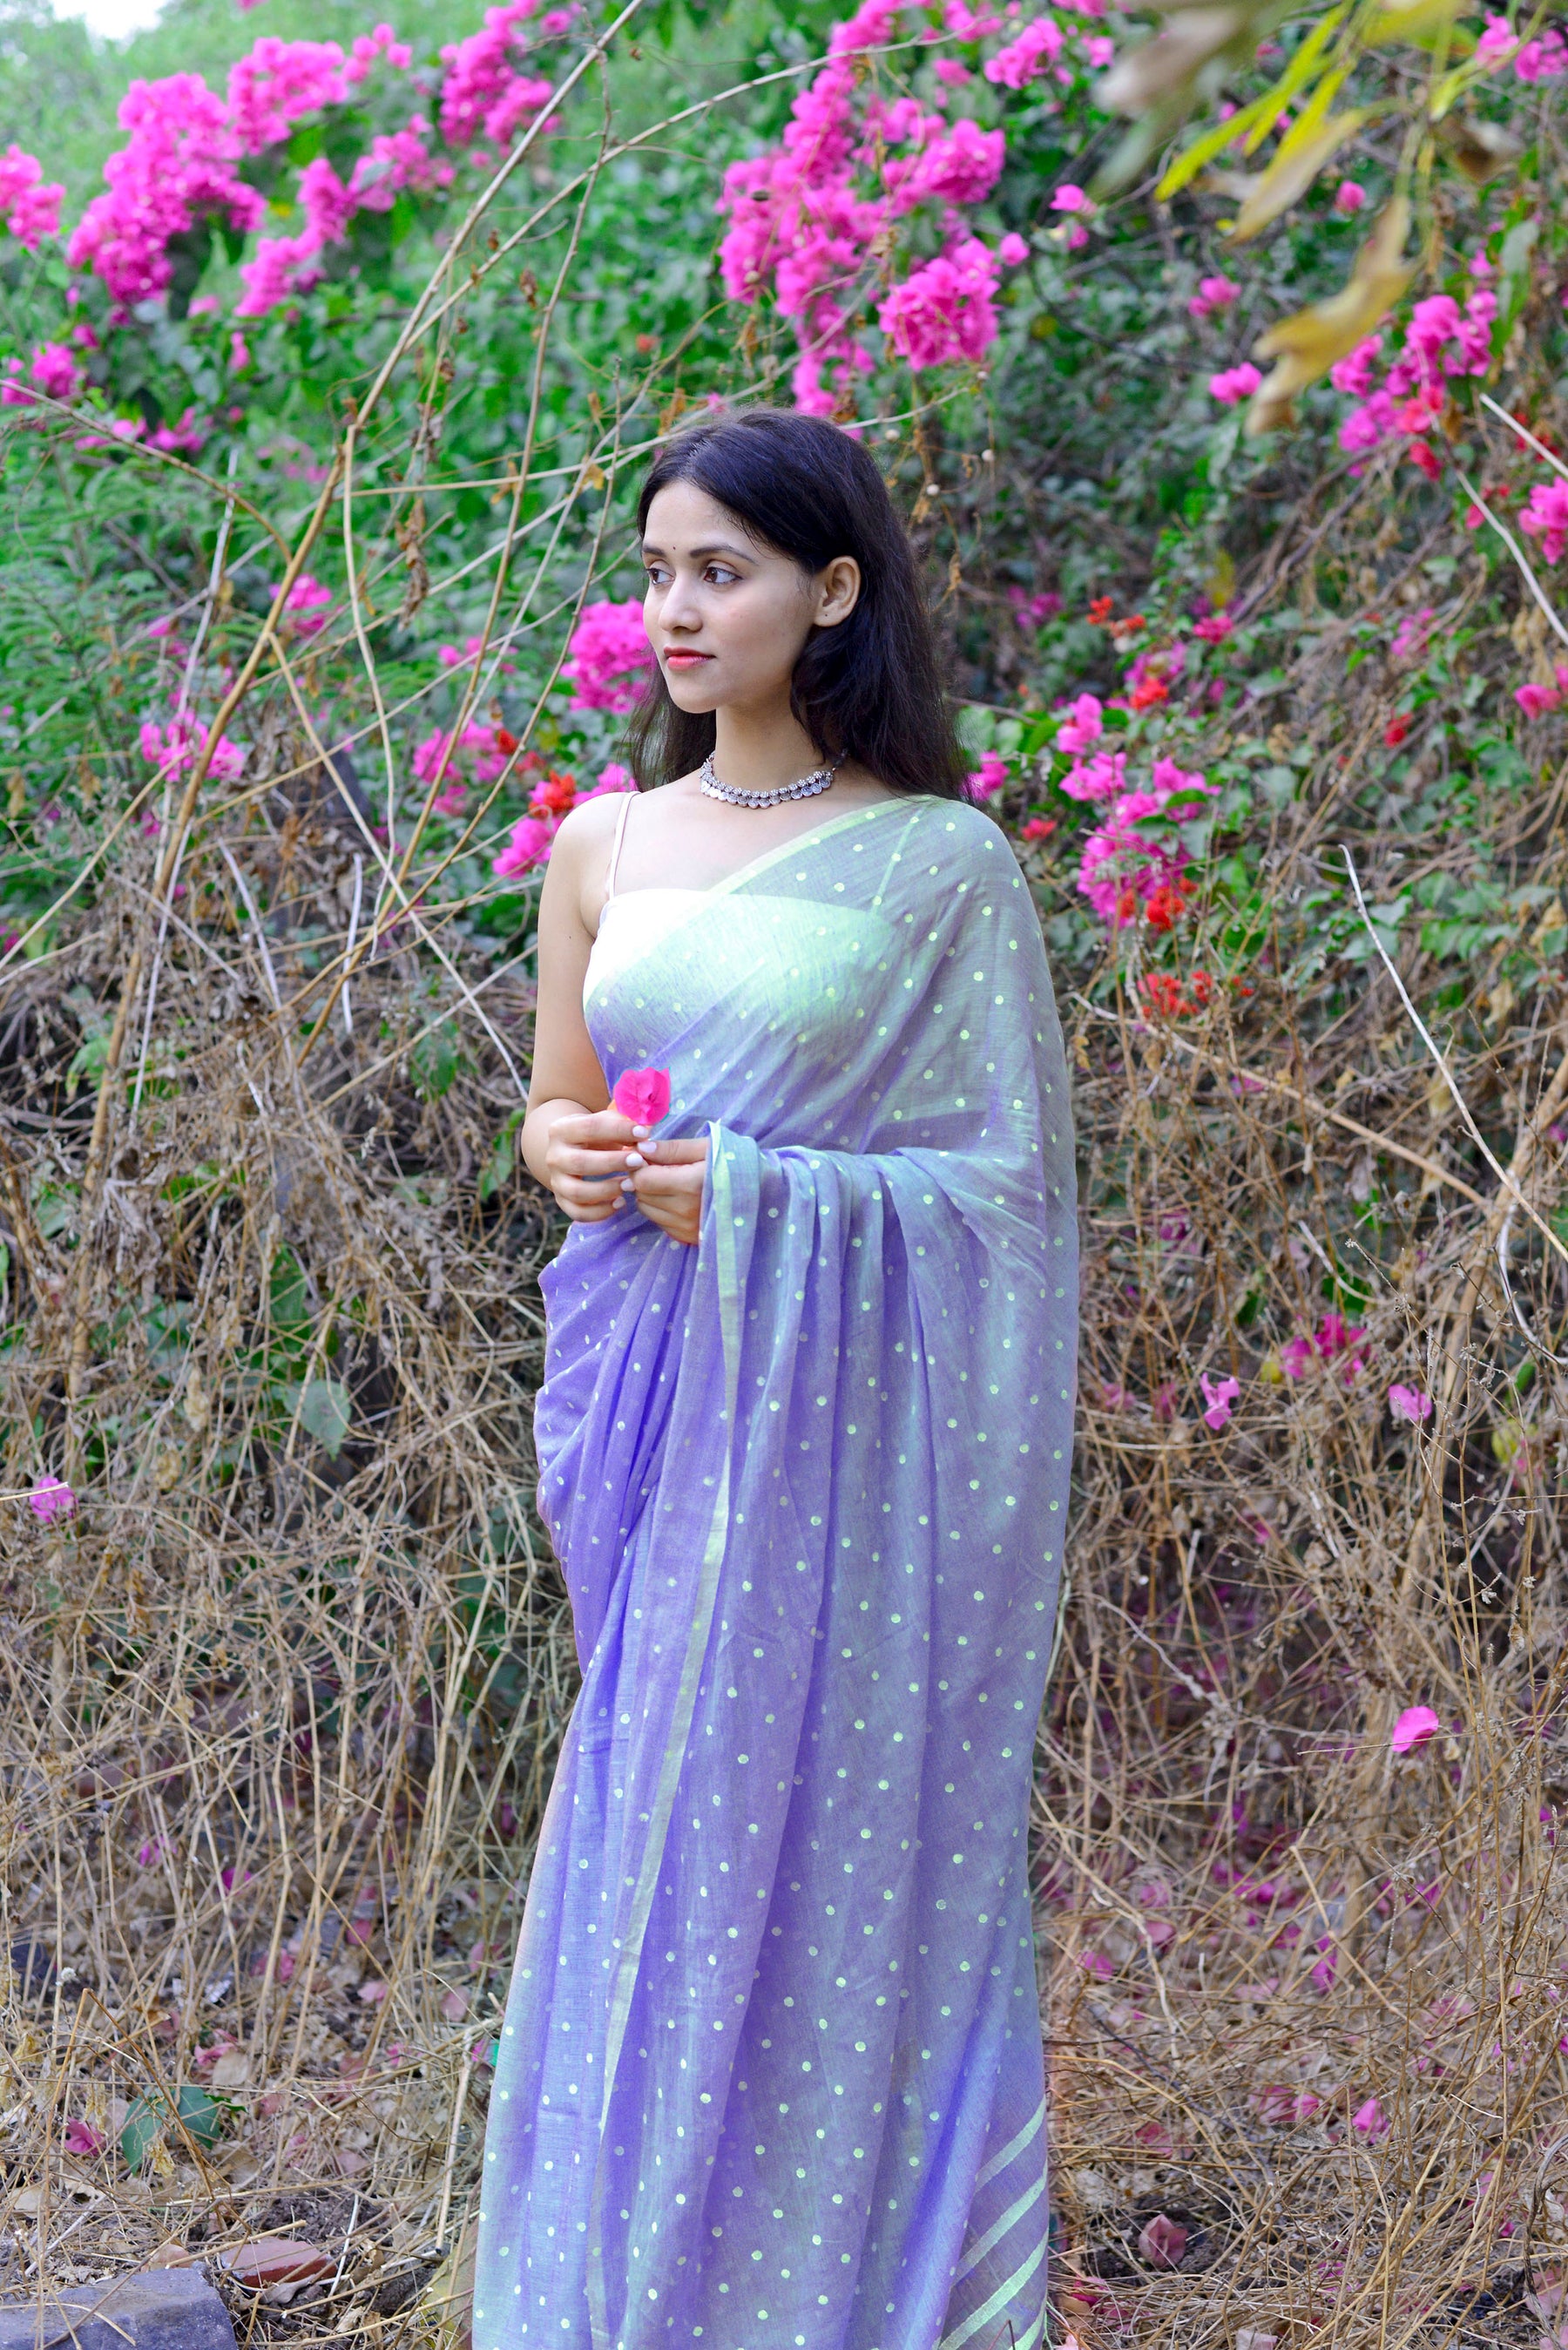 VIOLET LOVE (ALL OVER DOTS) HAND BLOCK PRINTED COTTON SAREE